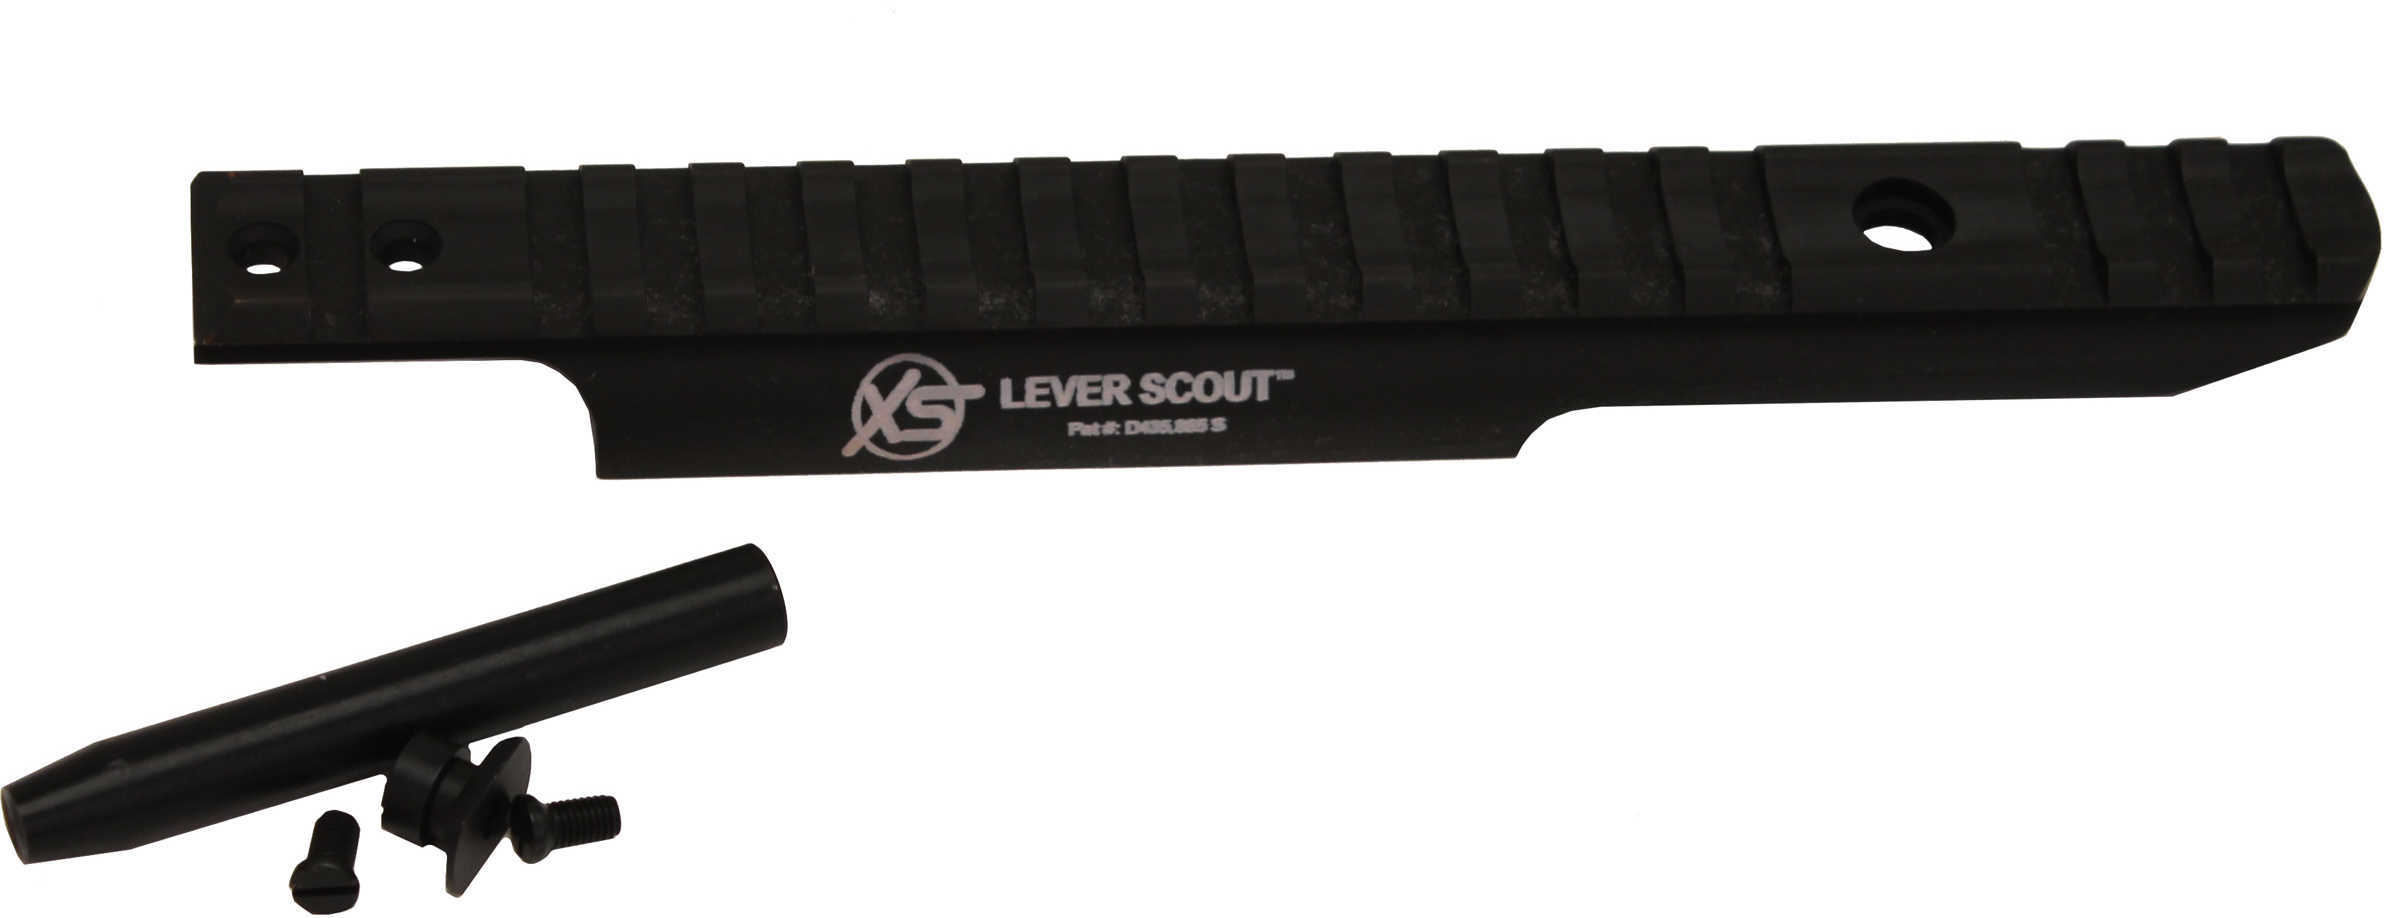 XS Sight Systems Mount Fits Marlin 189545-70450444 Lever Scout Round Barrel Black Finish Md: ML-6000R ML-6000R-N